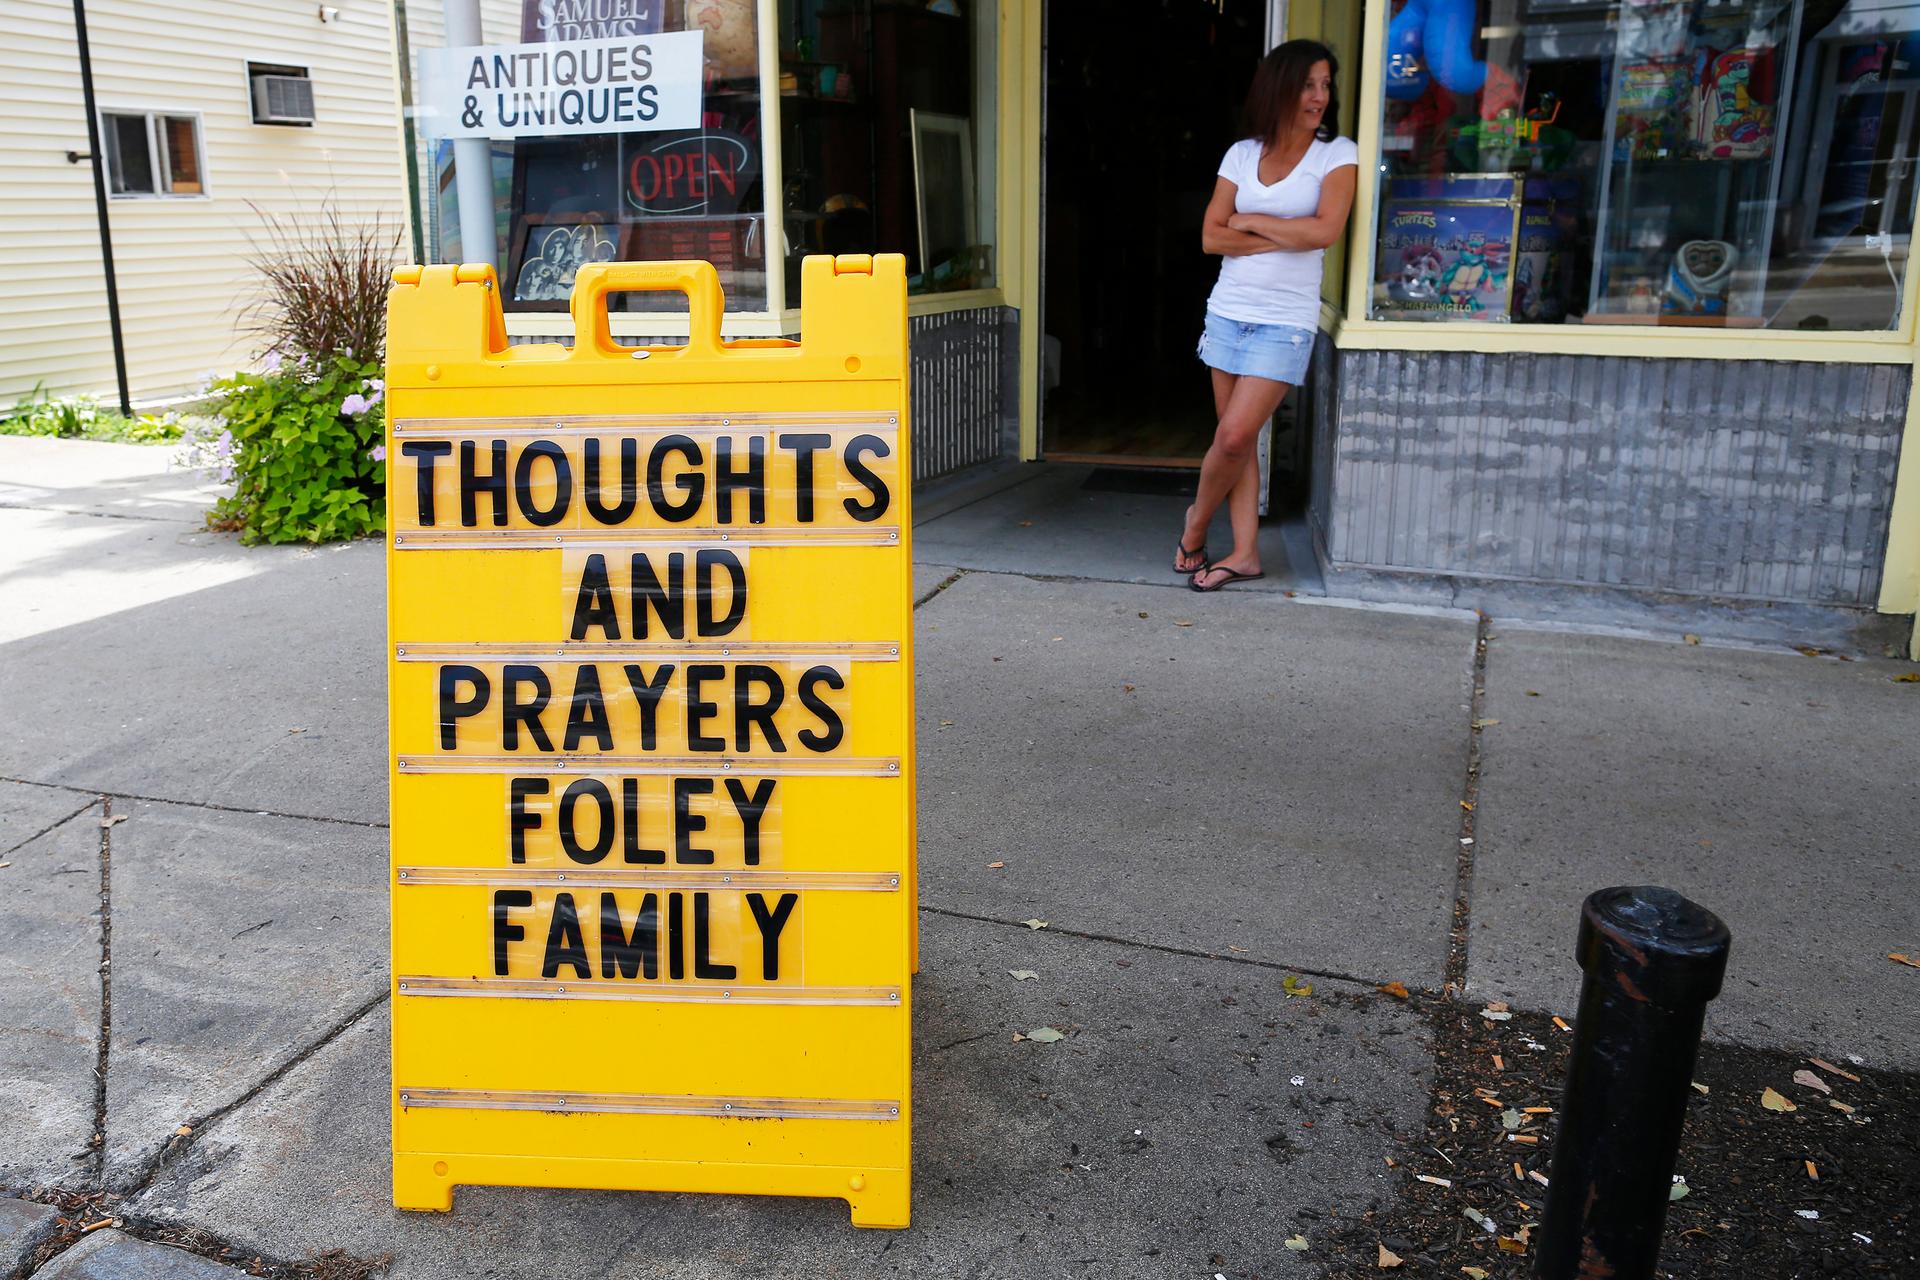 A sign outside a shop remembers James Foley in his hometown of Rochester, New Hampshire. Islamic State militants killed the journalist in a brutal videotaped beheading in revenge for US air strikes in Iraq.